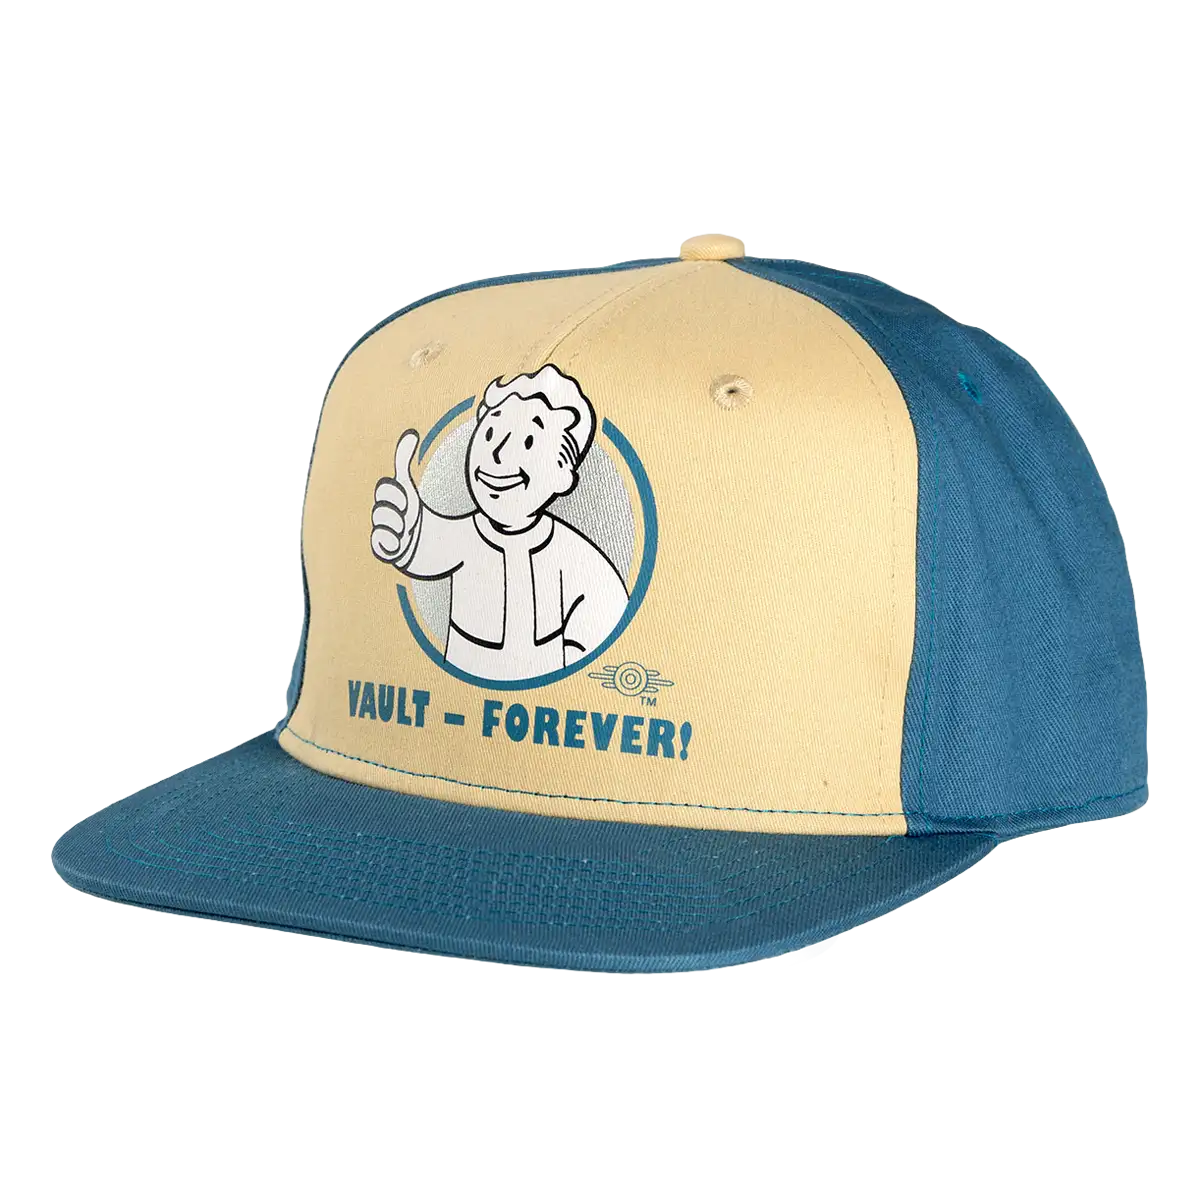 Fallout Snapback Cap "Vault Forever" Cover